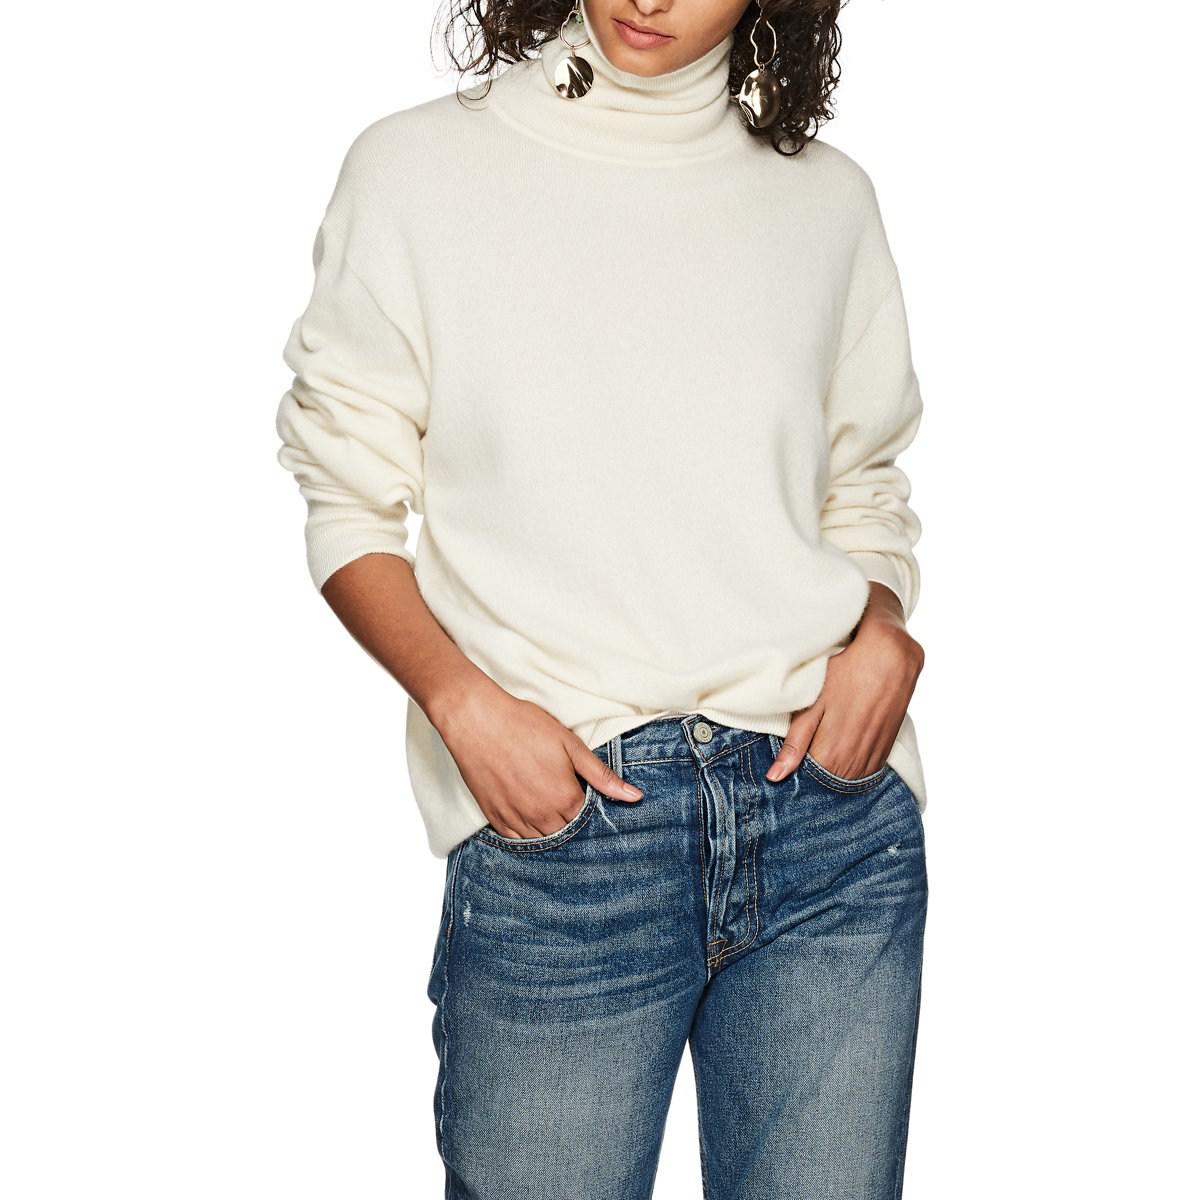 The Row Janillen Cashmere Turtleneck Sweater in Ivory (White) - Lyst